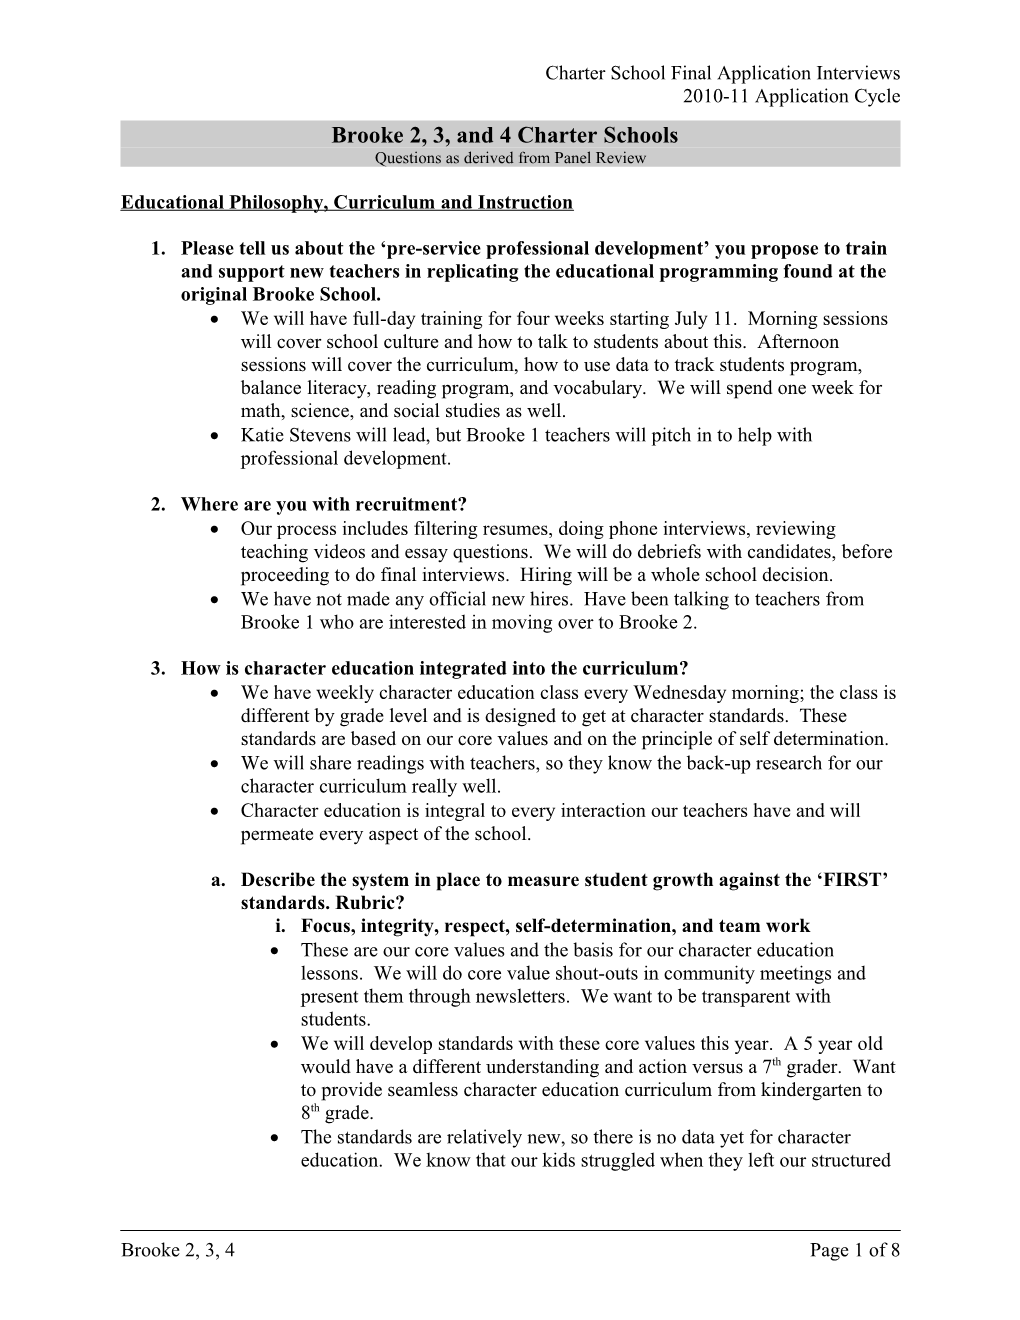 Standard Interview Questions for Founding Groups, Brooke 2, 3, and 4 Charter Schools